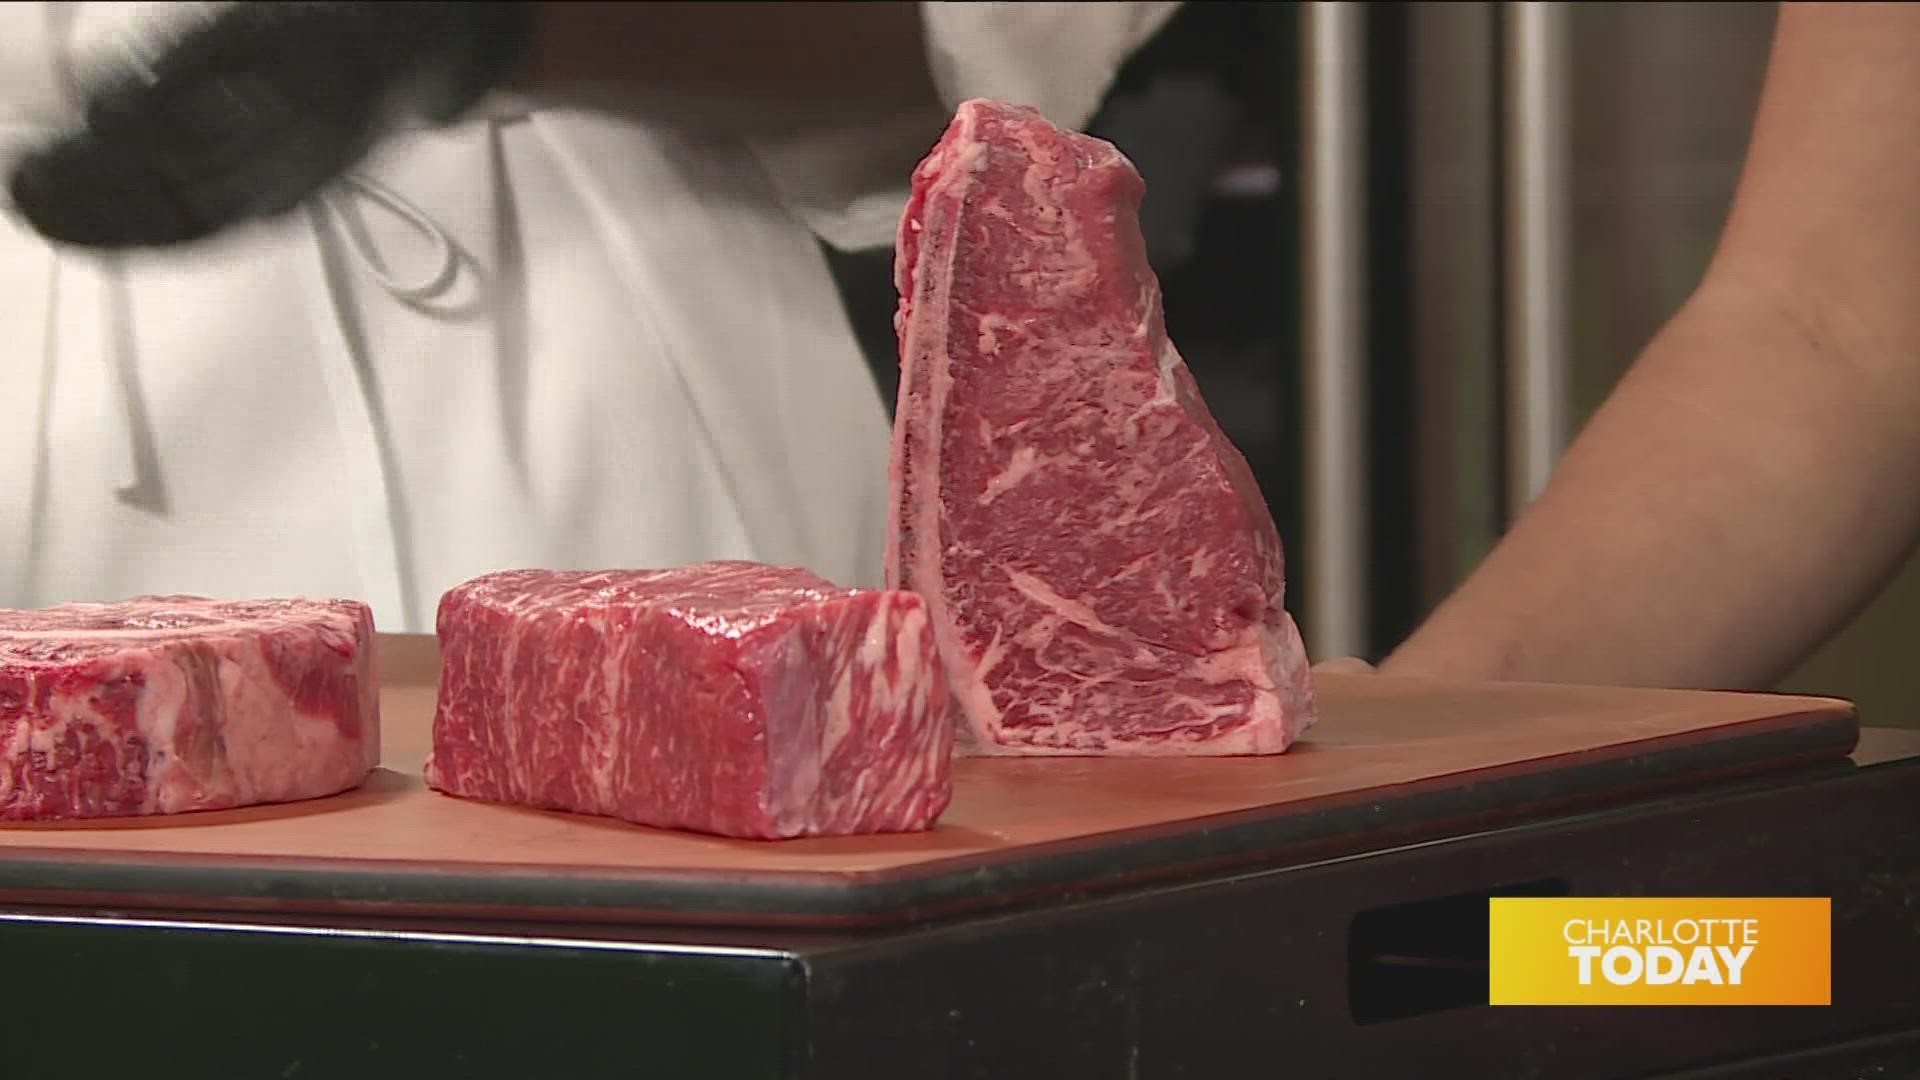 Learn more about the different cuts of steak and how to order them